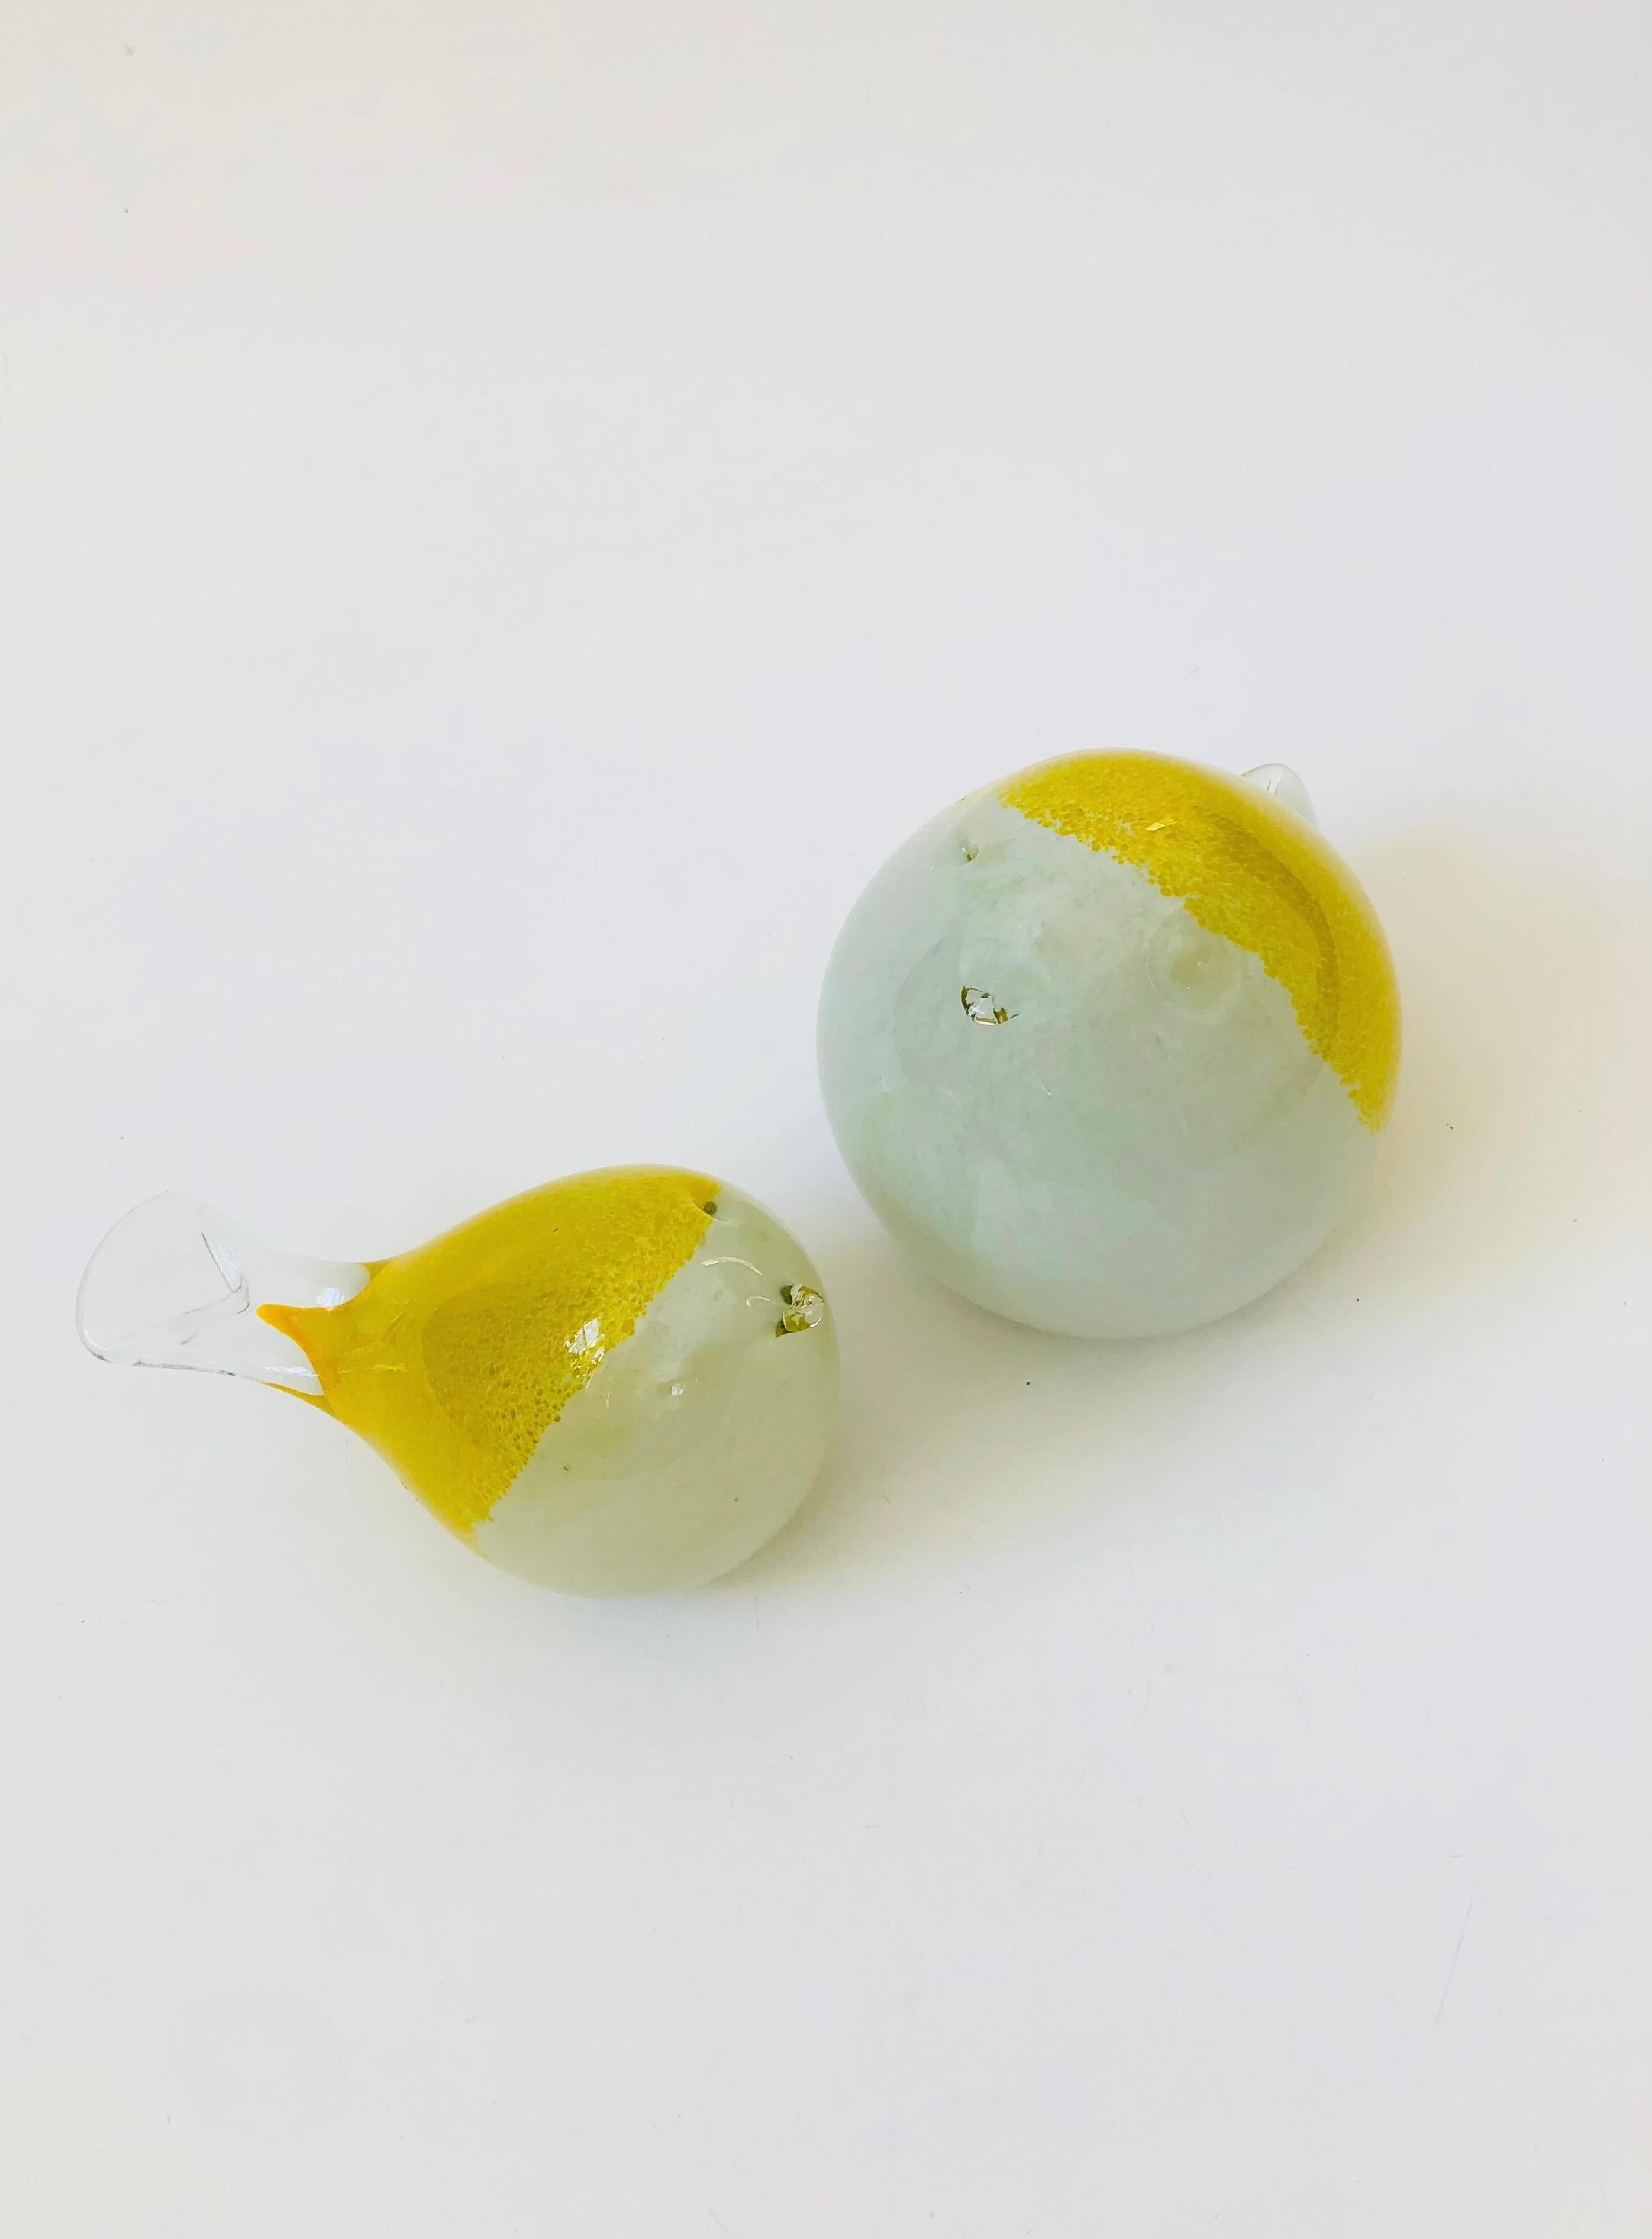 A pair of vintage art birds. Made of blown glass into rounded forms with yellow and white coloring. Nice larger size to use as statement pieces.
Measurements:
6.25